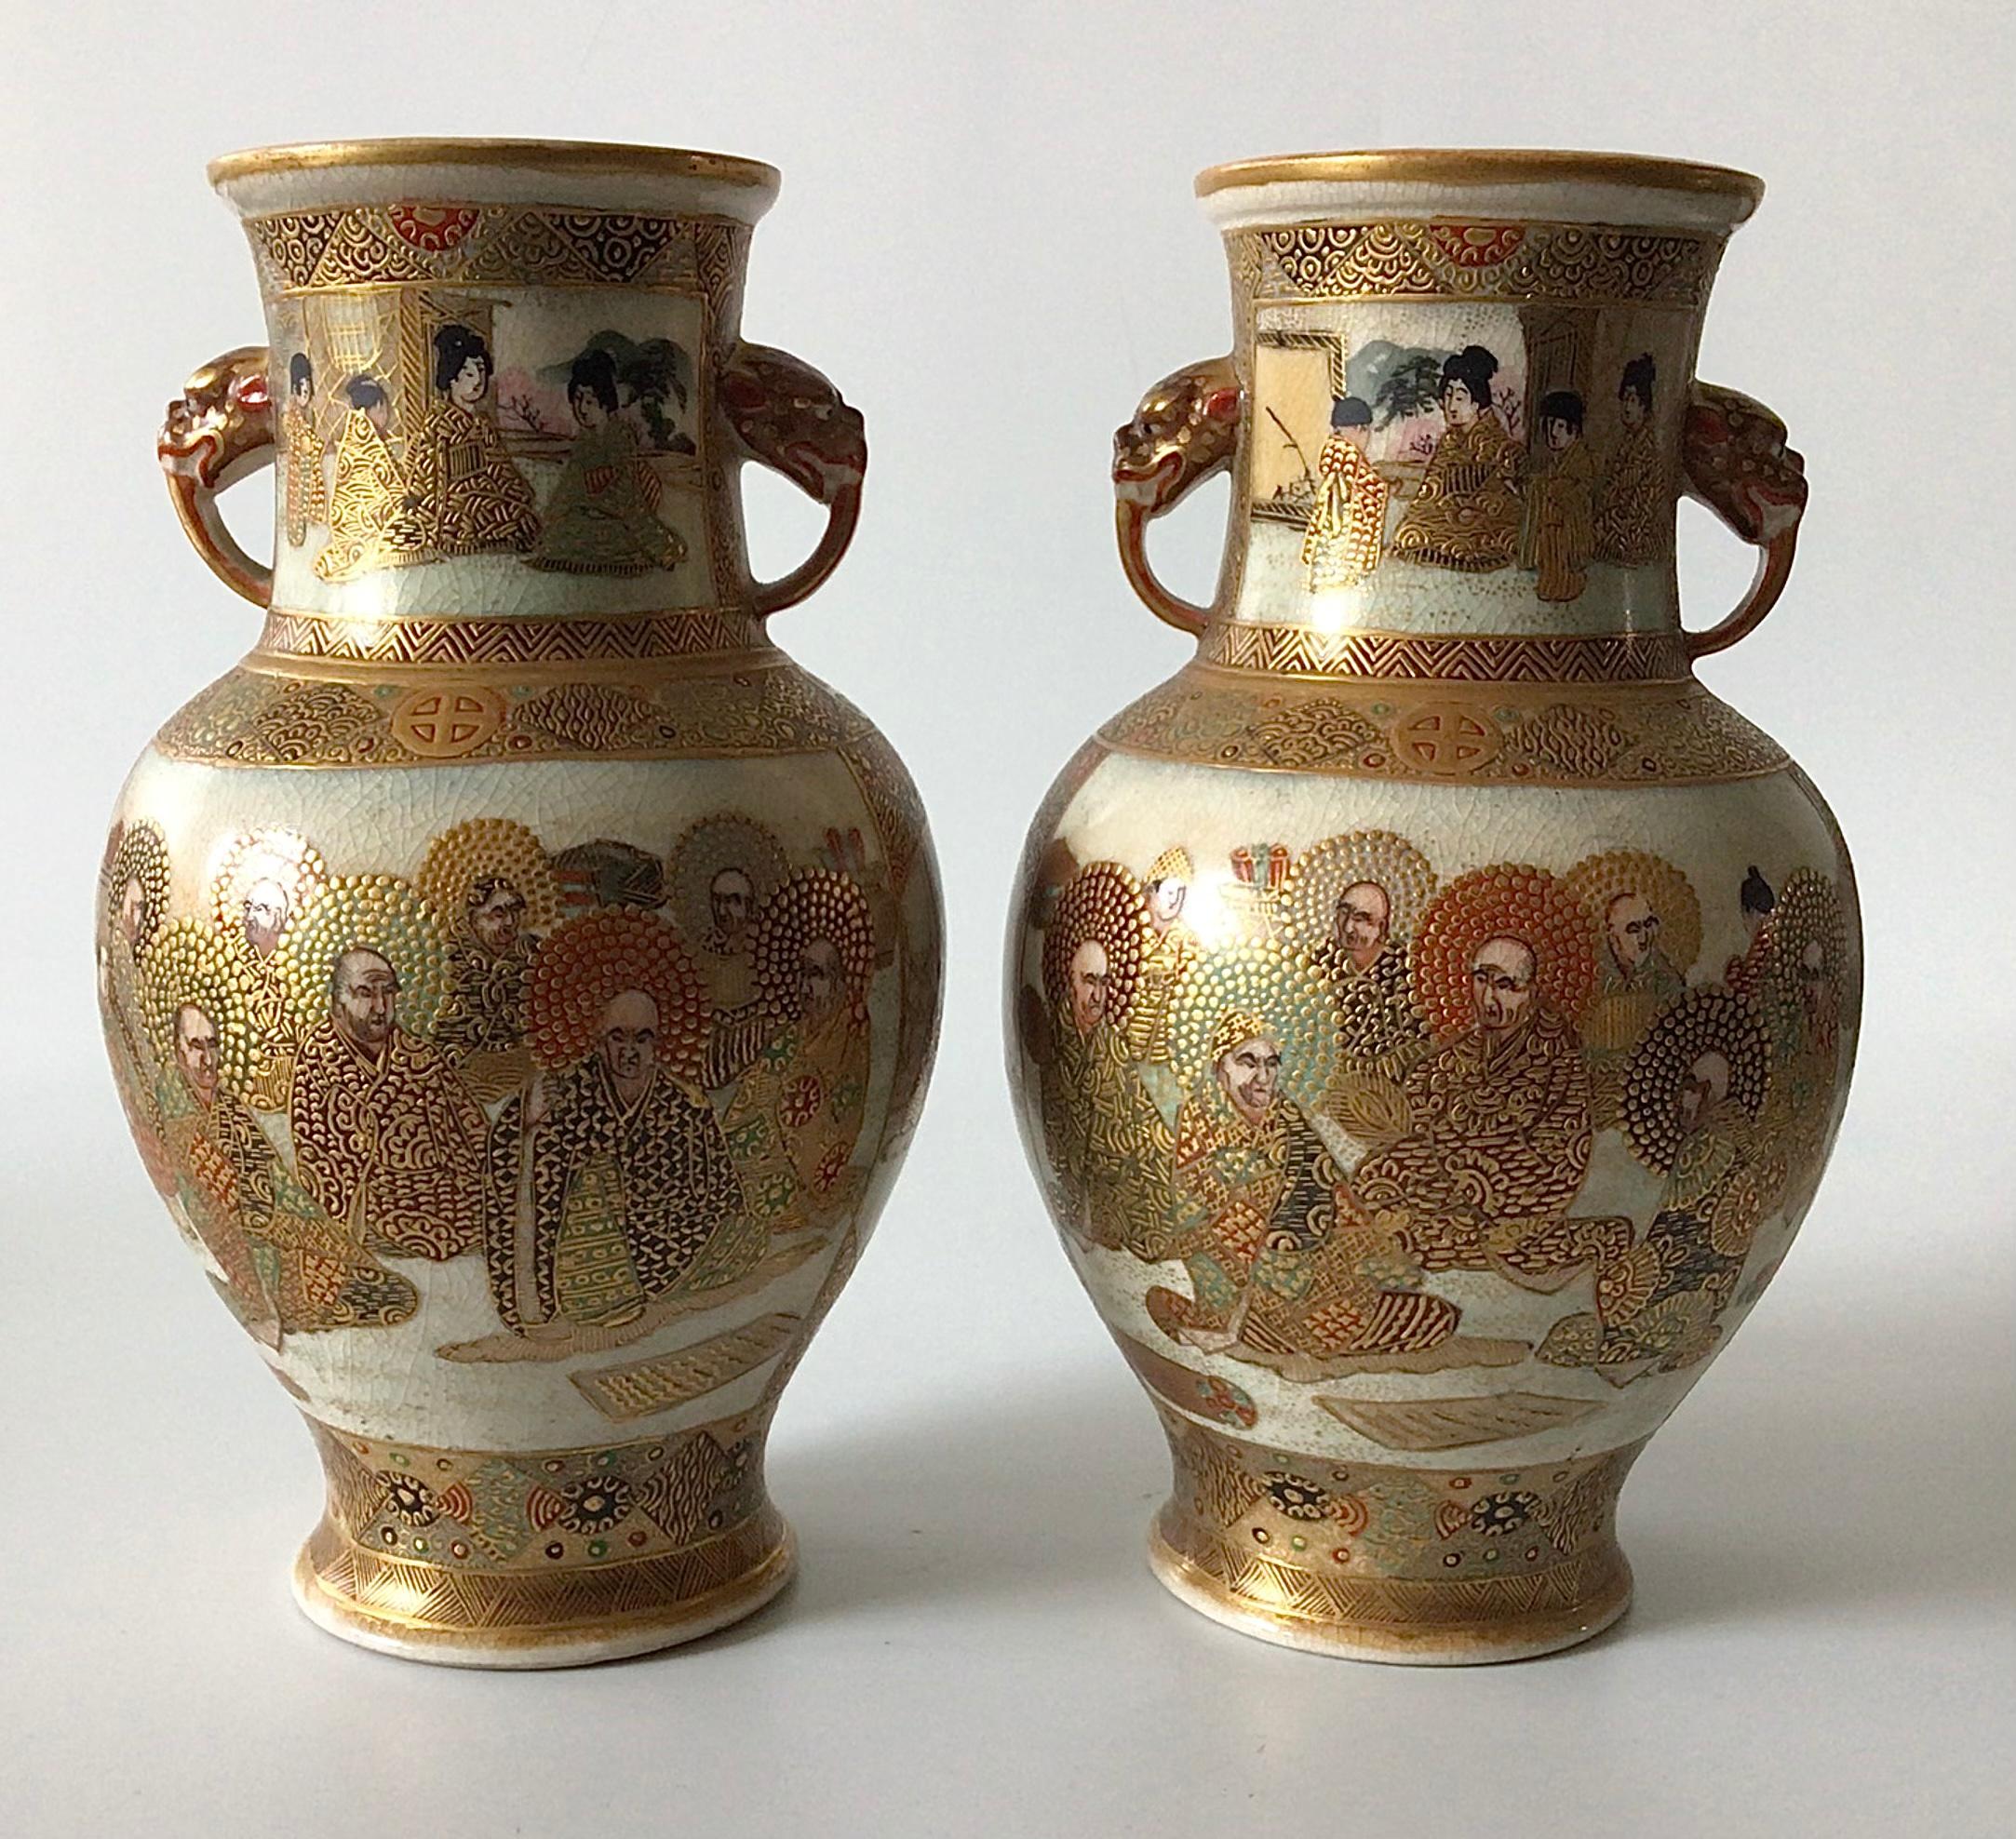 Antique Pair of Fine Satsuma vases with animal handles and amazing hand painted decoration. Each piece is signed by the artist. Vases are 7.5 inches tall by 4.5 inches wide. 

Following the popularity of Satsuma ware at the 1867 exhibition and its